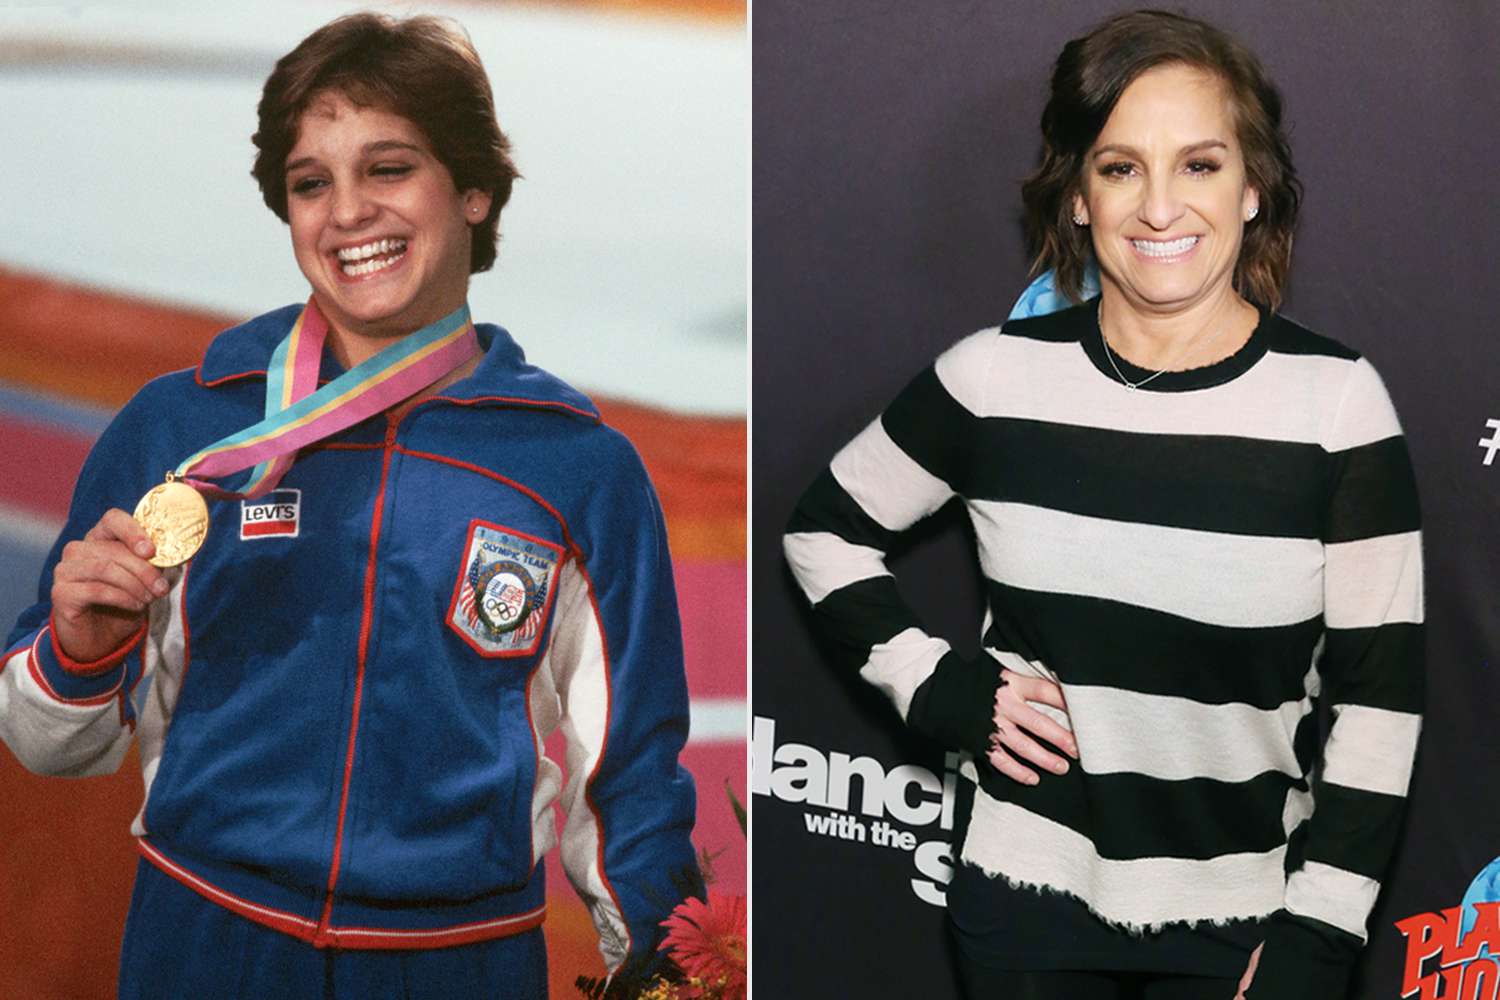 Mary Lou Retton Won Gold 40 Years Ago Today: Look Back at the Historic Moment and Her Life Now